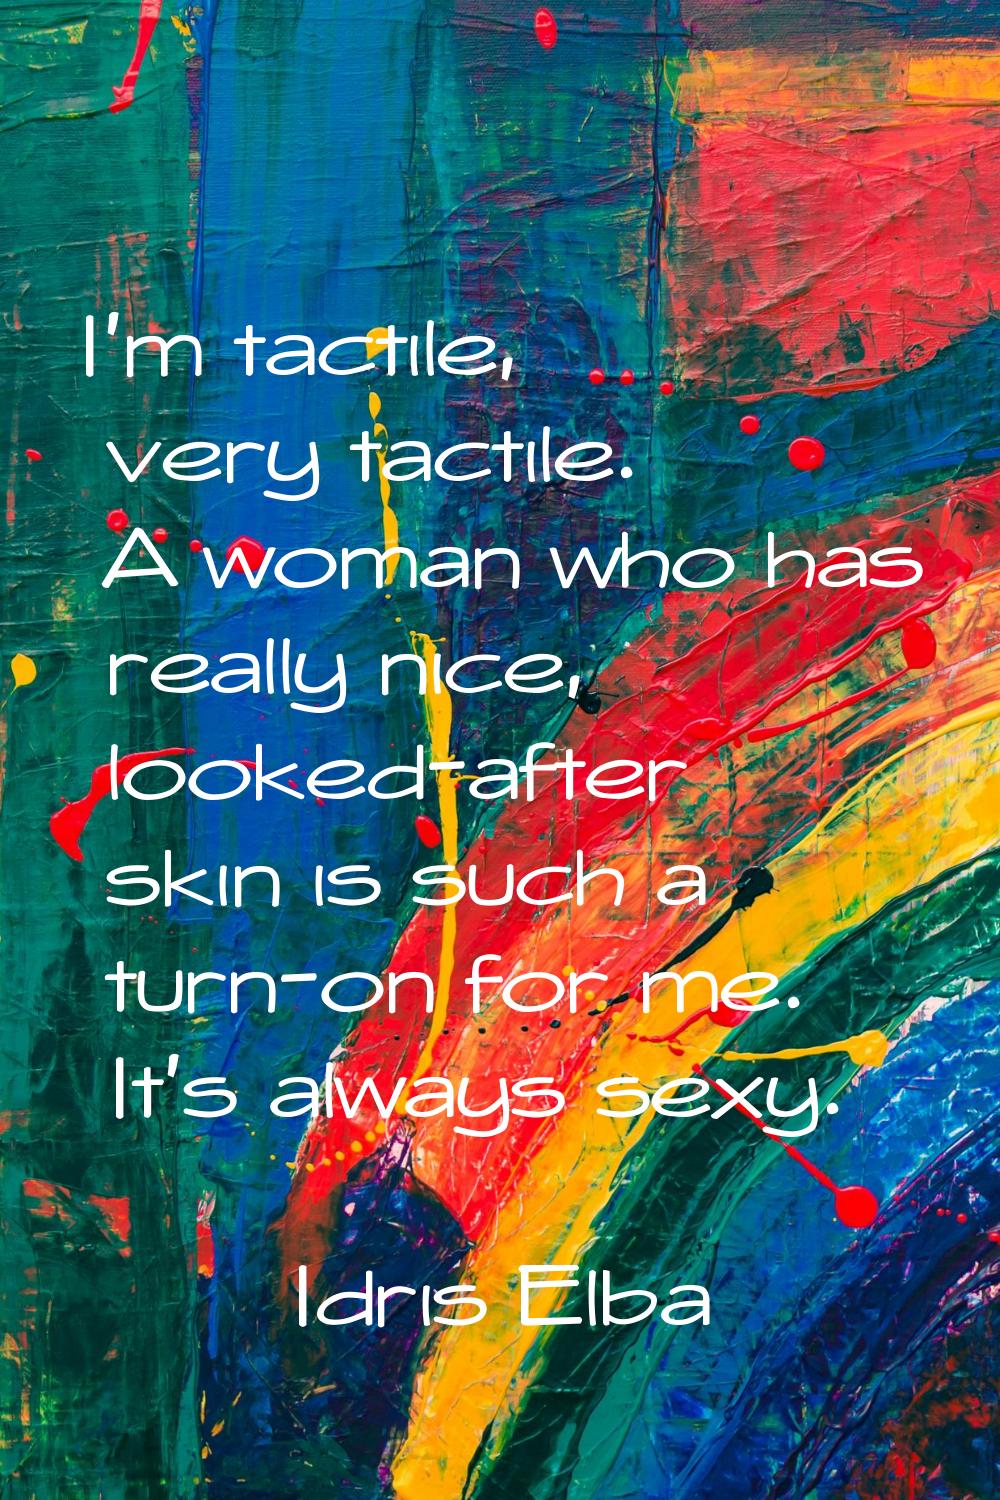 I'm tactile, very tactile. A woman who has really nice, looked-after skin is such a turn-on for me.